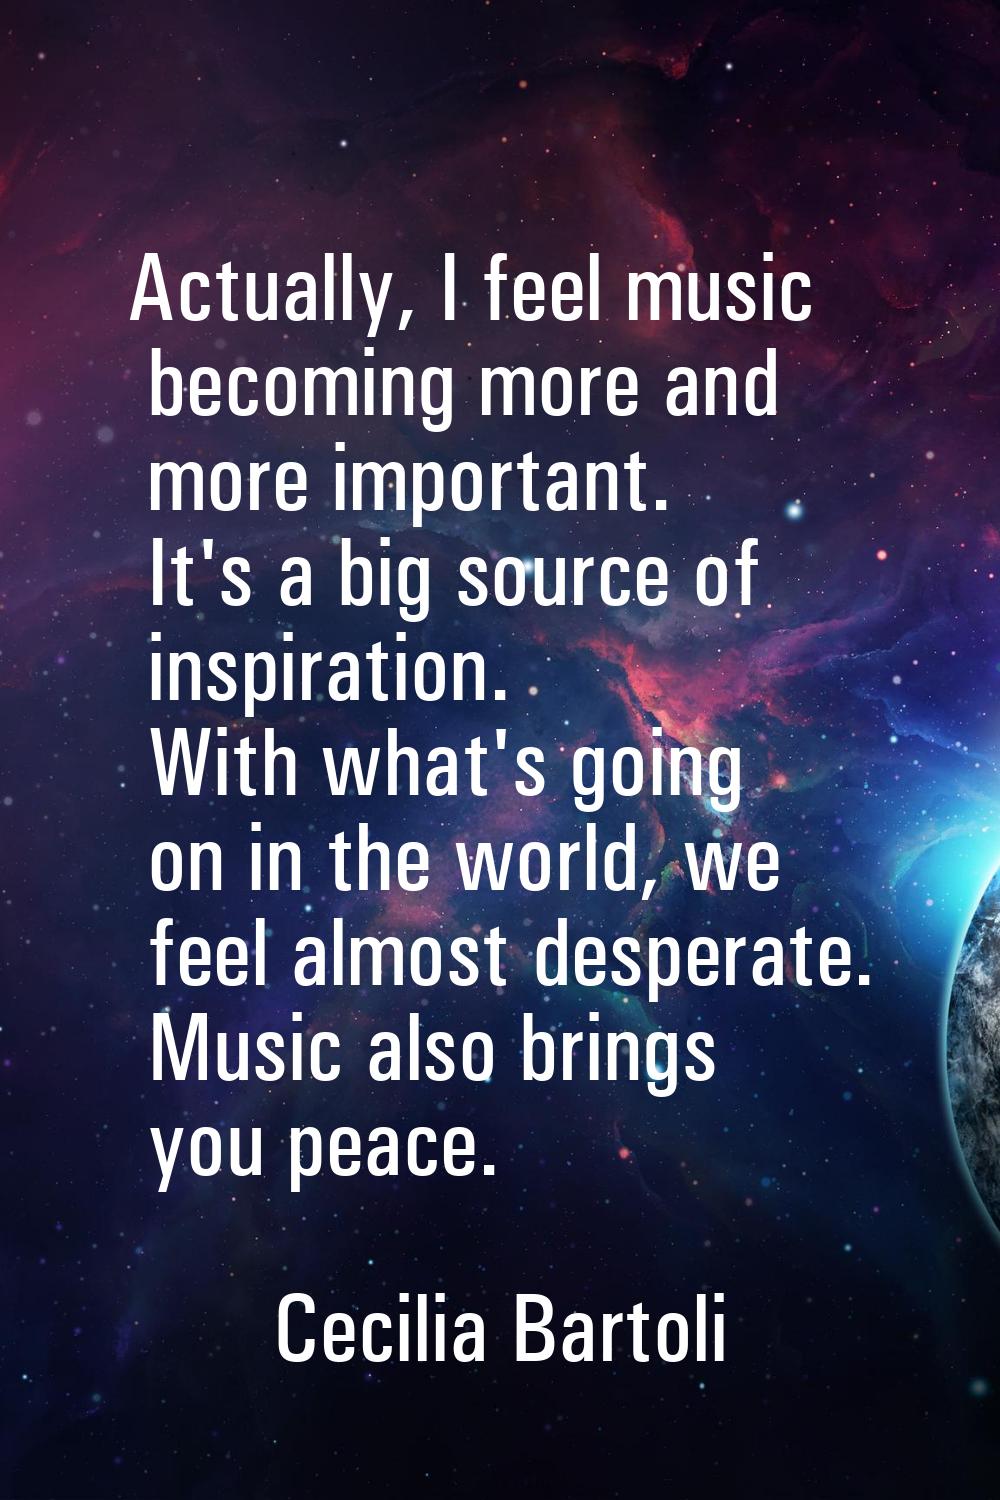 Actually, I feel music becoming more and more important. It's a big source of inspiration. With wha